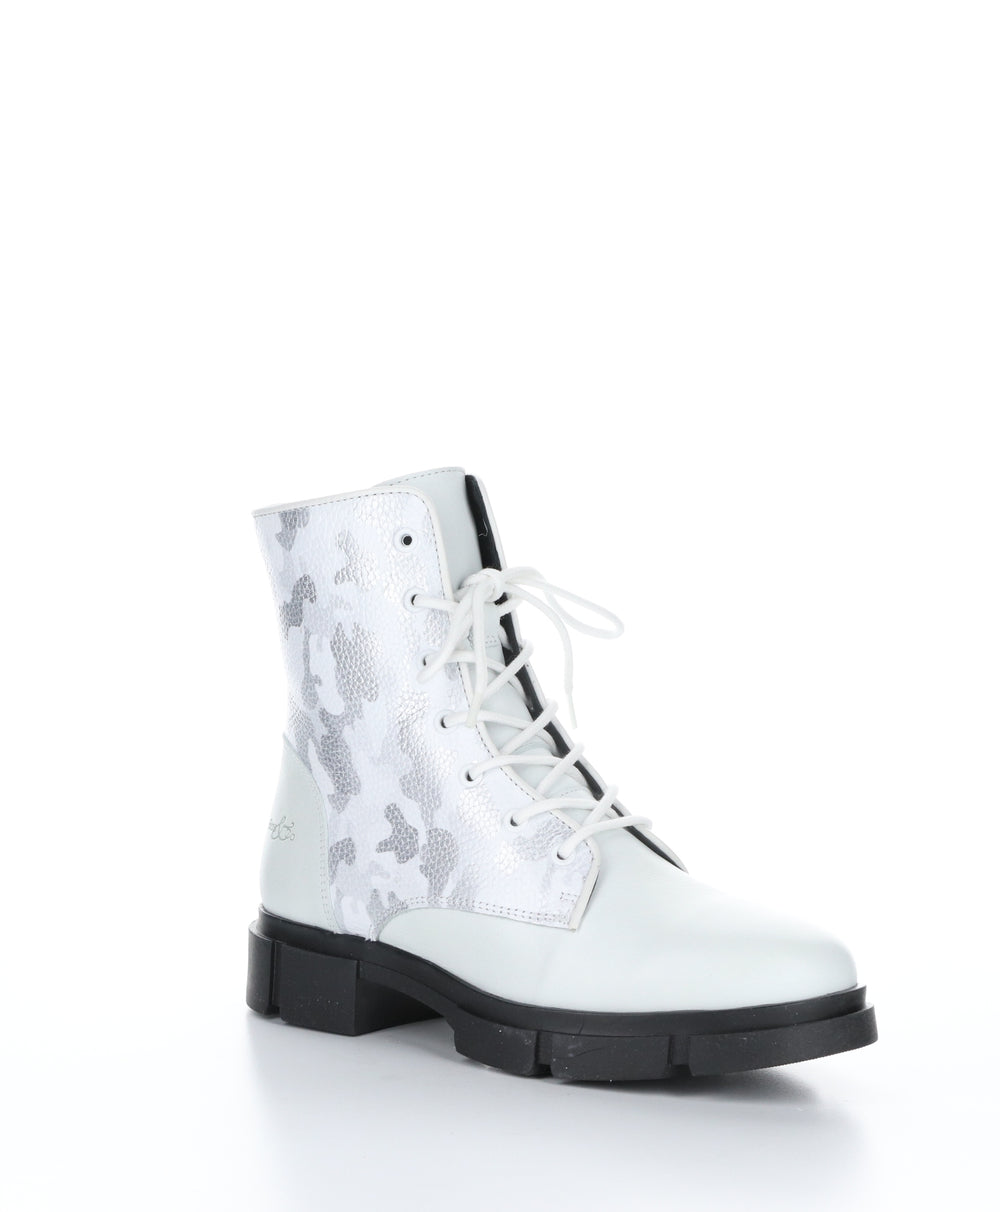 LUCK White/White/Silver Zip Up Boots